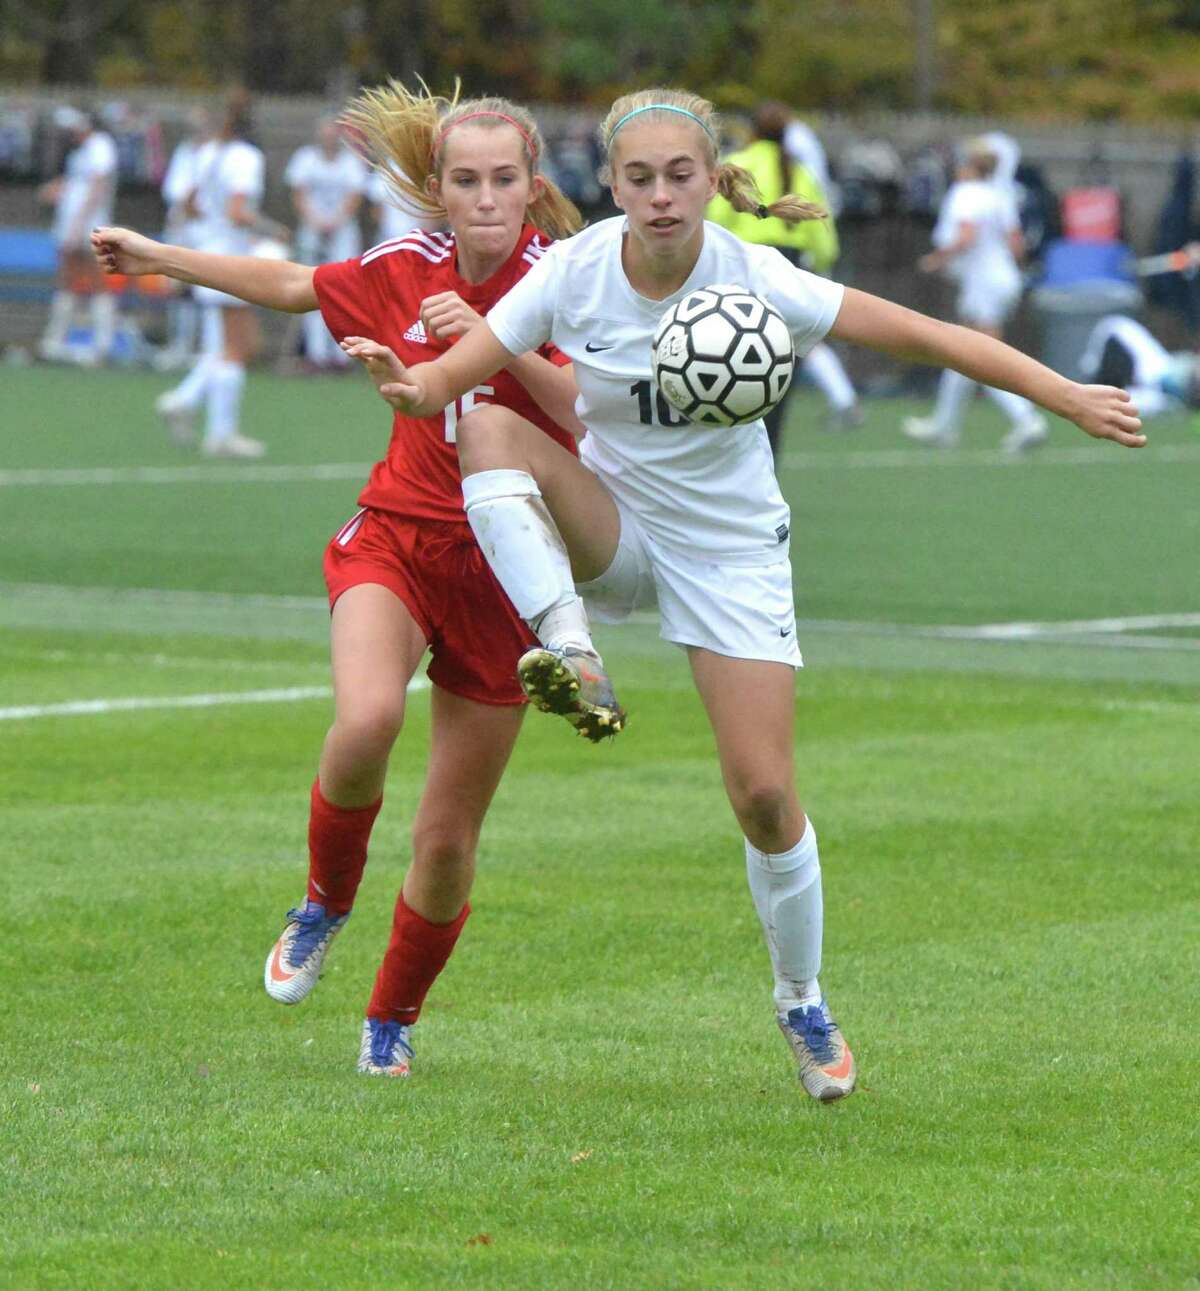 Staples’ Ashley Wright (10) keeps the ball away from New Canaan's Eliza Farley (15) during Class LL girls soccer at Staples High School on Wednesday Westport.